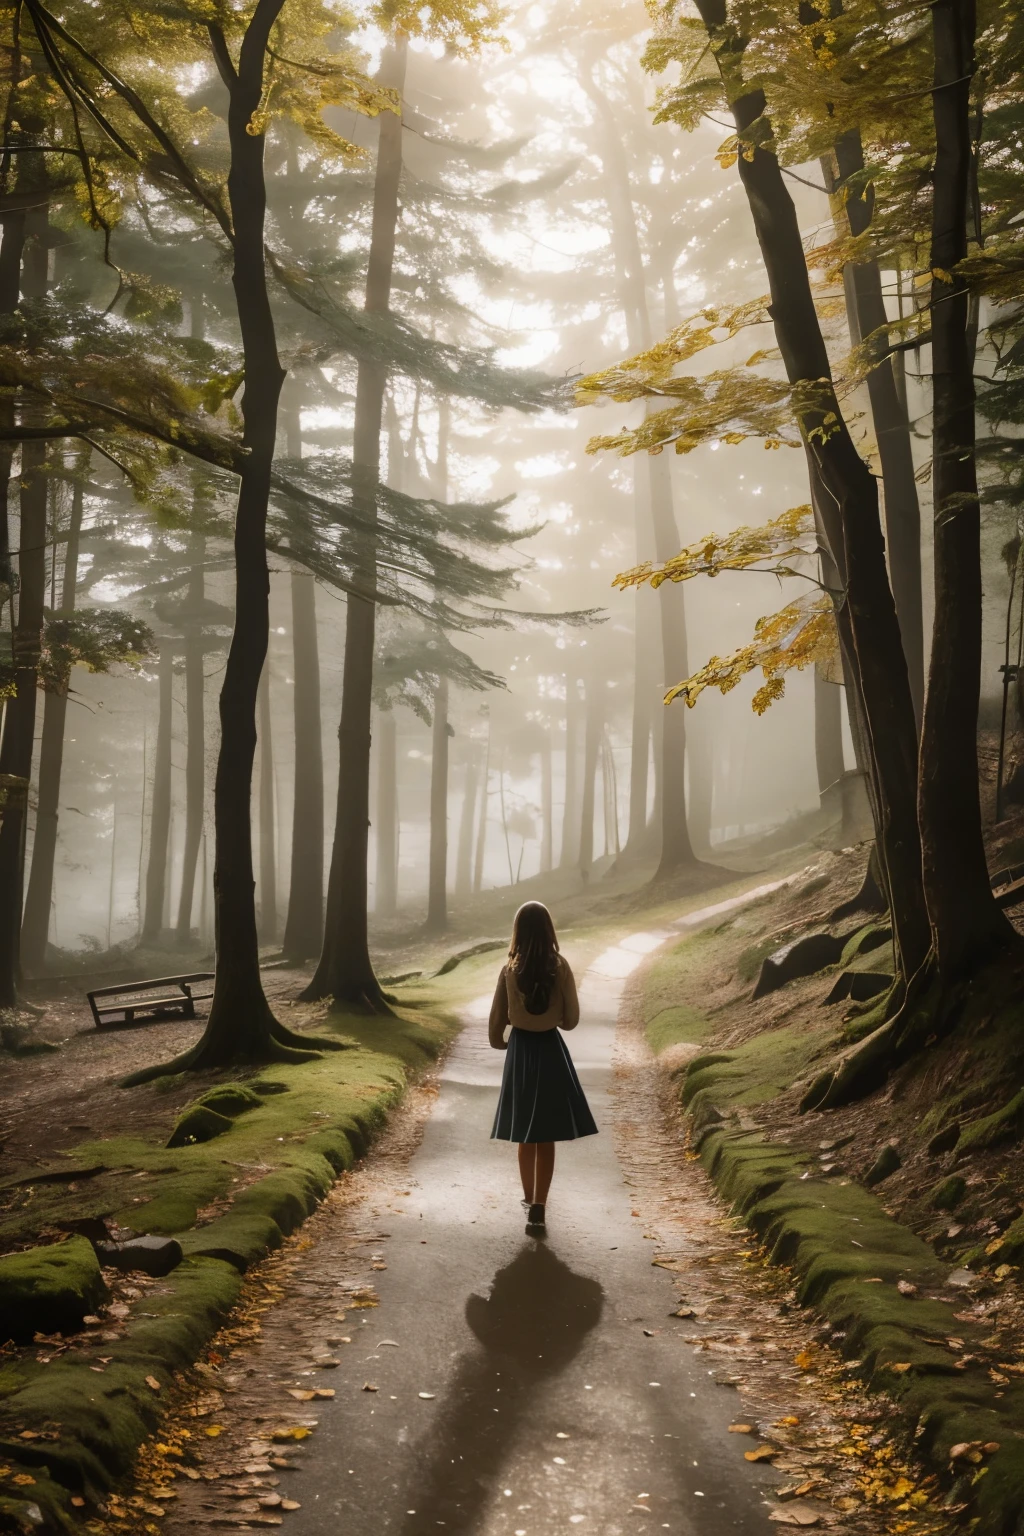 A girl walking in a path through the woods, fog, autumnal landscape, sunlight filtering through the fog and branches, [oil painting] texture, detailed foliage, fallen leaves on the ground, moss-covered rocks, soft sunlight illuminating the girl's face, long shadows stretching across the path, vibrant colors, realistic rendering, vivid hues, bokeh effect, [highres] image, intricate details on the girl's dress, serene atmosphere, [photorealistic:1.37] aesthetics, peaceful ambiance, misty surroundings, tranquil scene, natural lighting, enchanting and dream-like quality, captivating beauty.